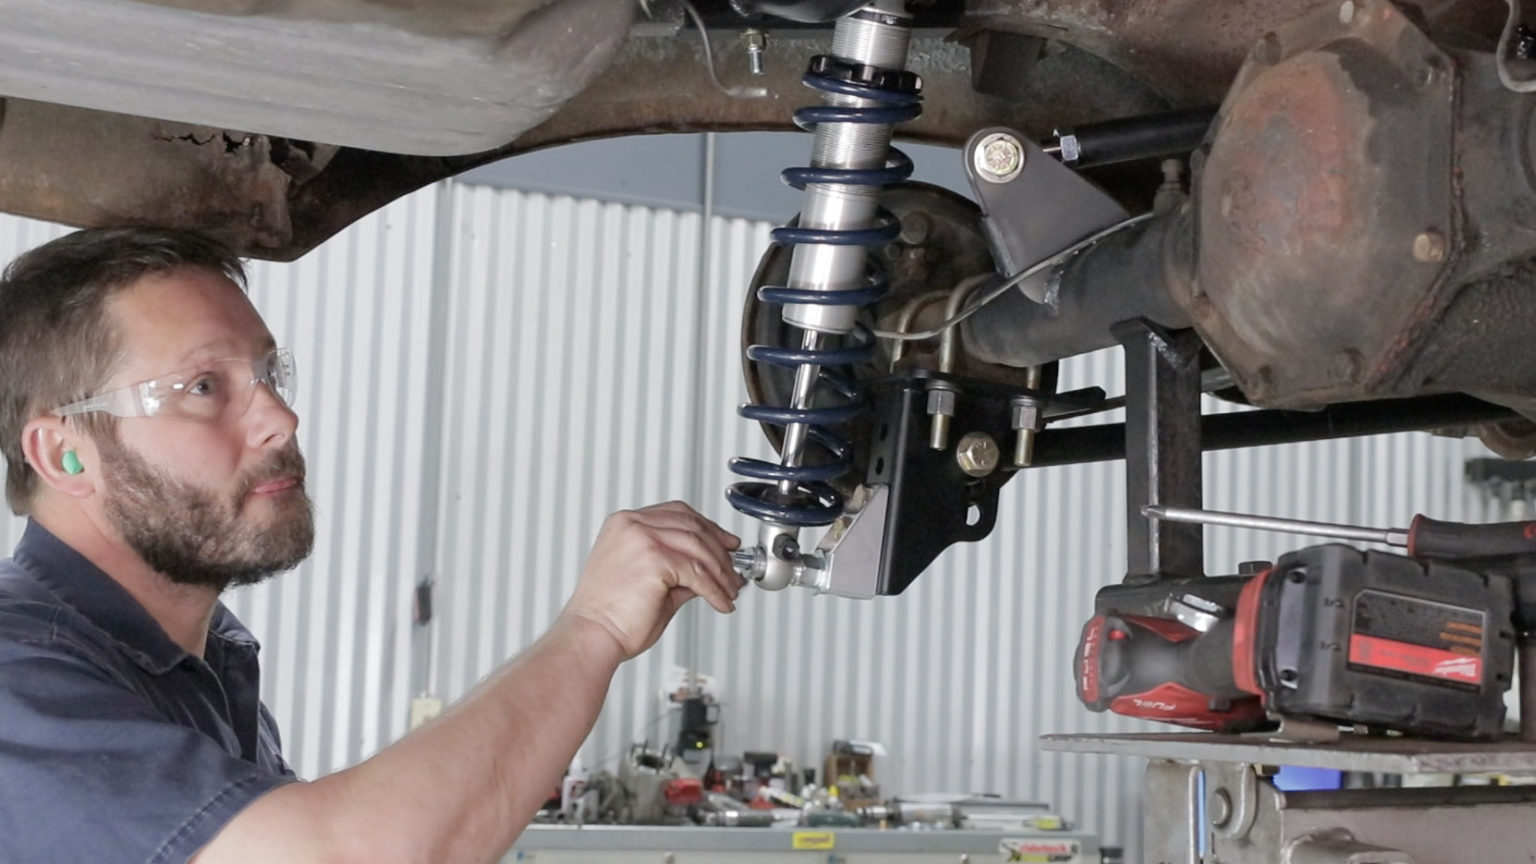 New Suspension Tech for the Ford Falcon - Better Ride and Handling